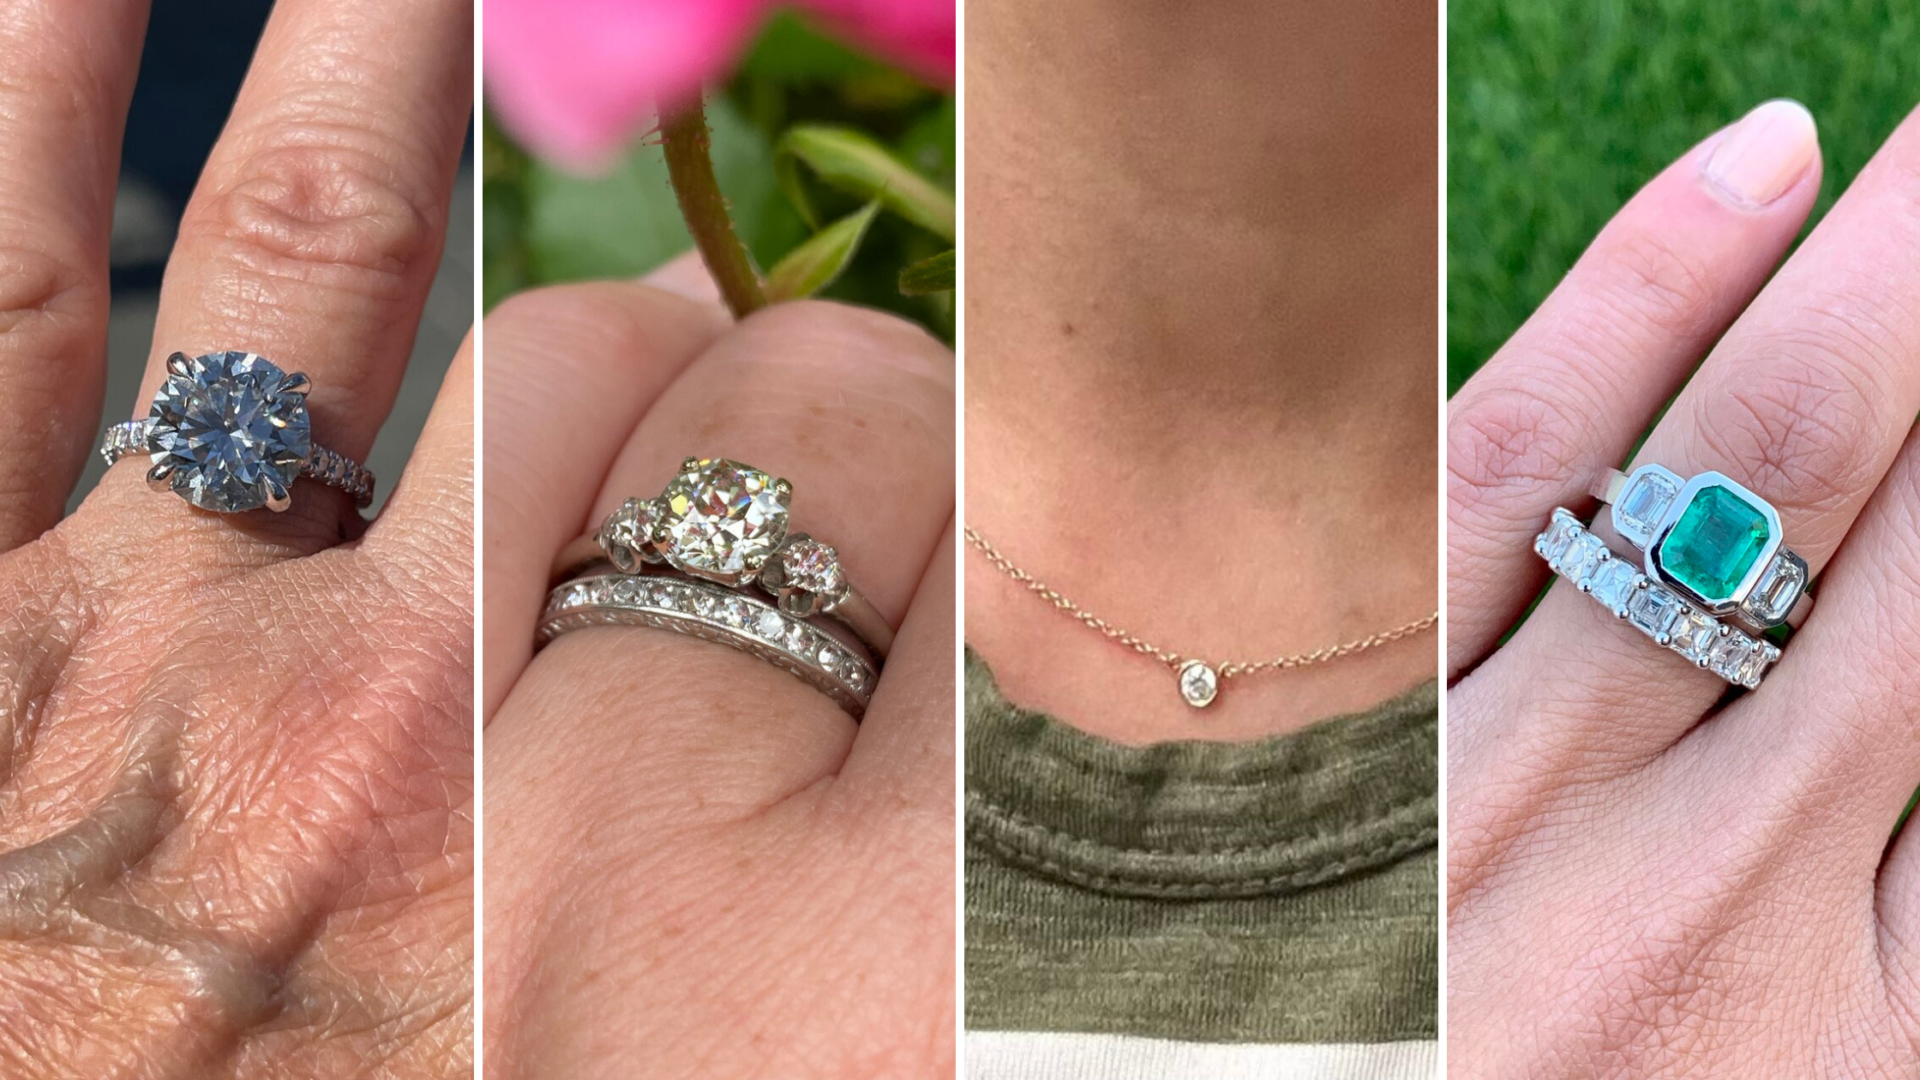 Did You See July 2022 Jewels Of The Week?